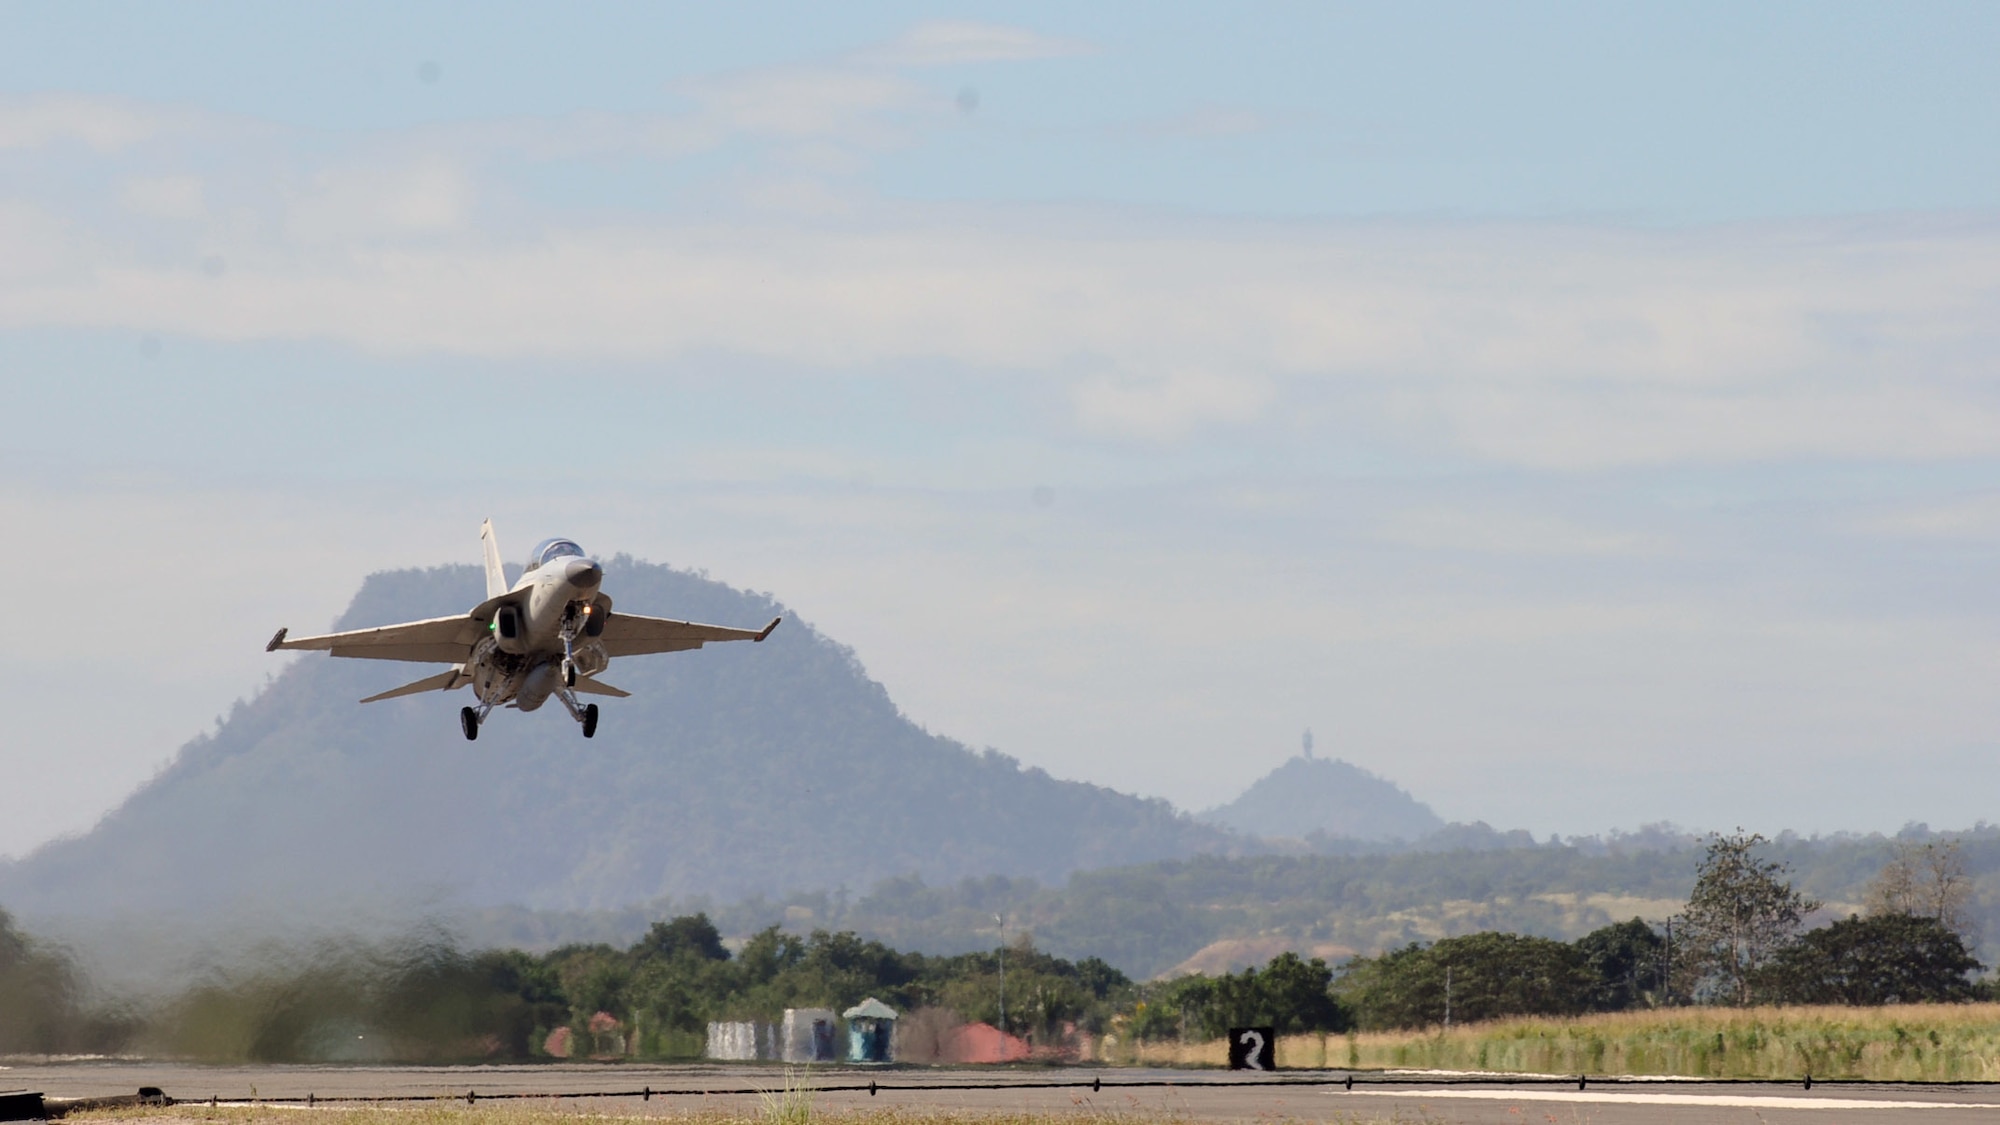 A Philippine Air Force FA-50 takes off during the Bilateral Air Contingent Exchange-Philippines (BACE-P) at Cesar Basa Air Base, Philippines, Jan. 22, 2019.